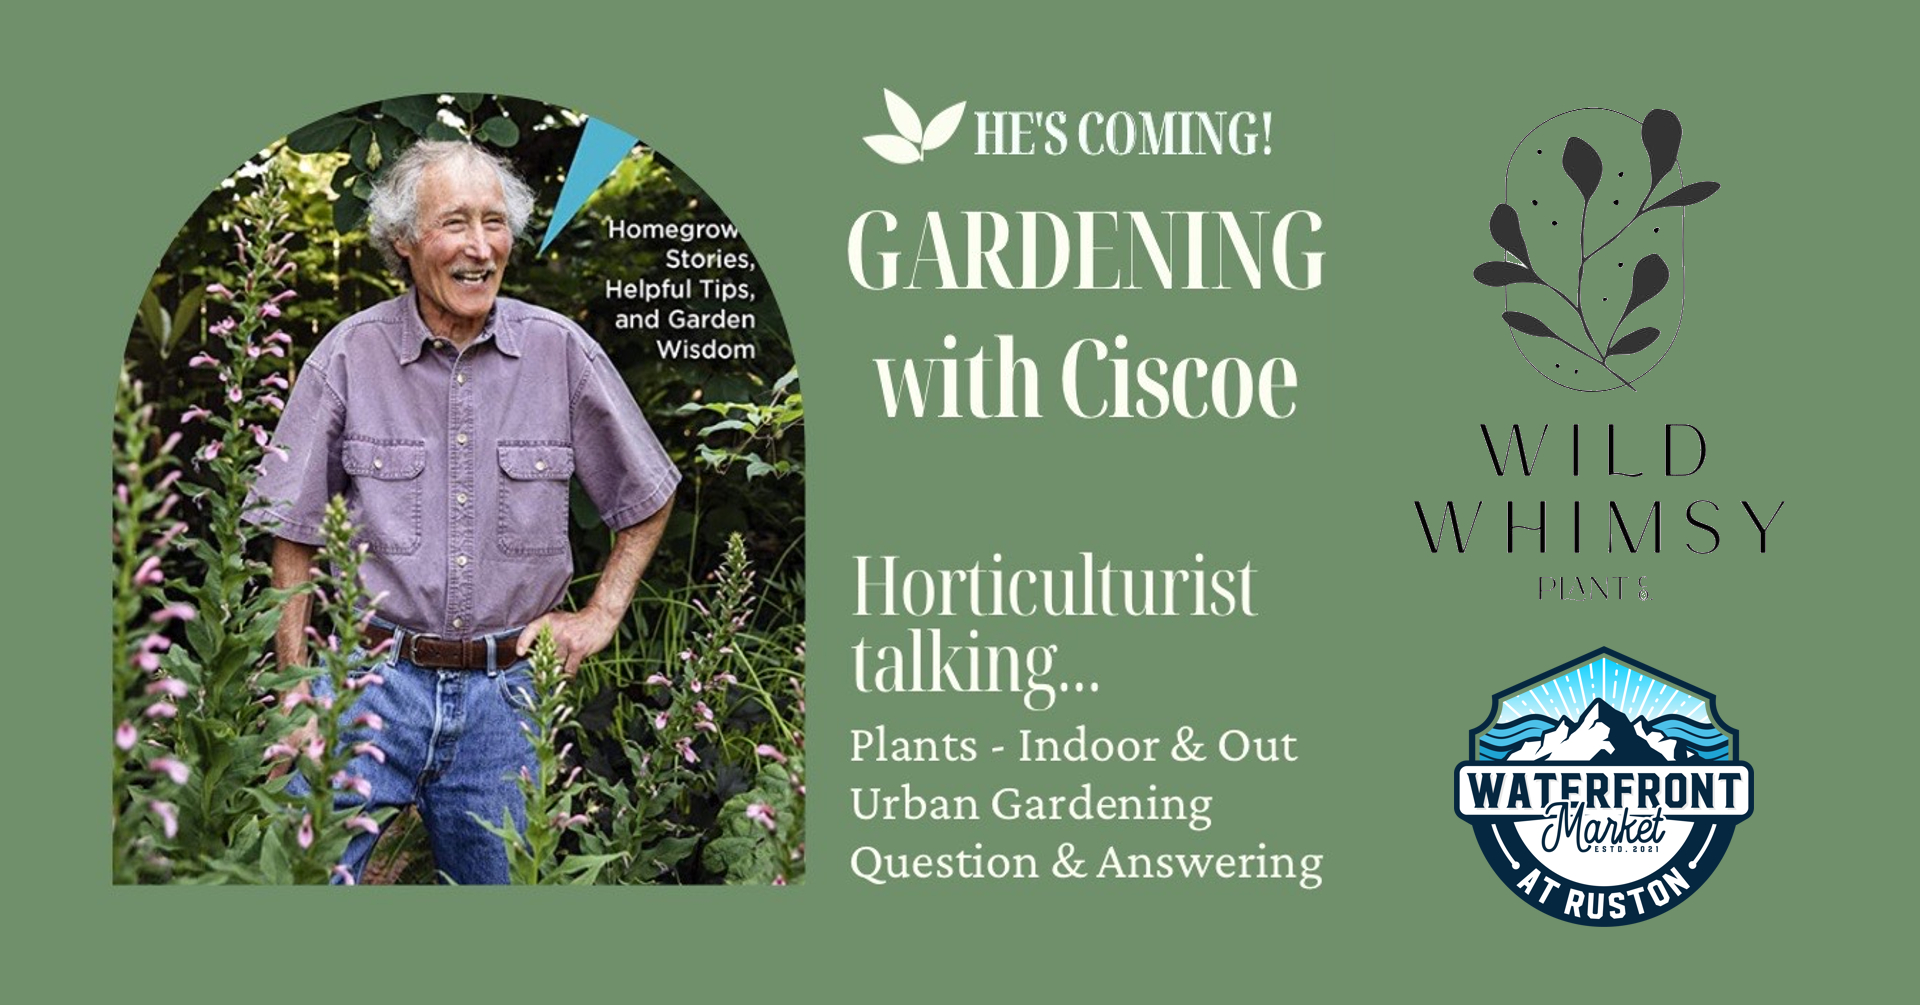 Ciscoe from Gardening with Ciscoe will be at Waterfront Market at Ruston June 3rd. Tickets will be required